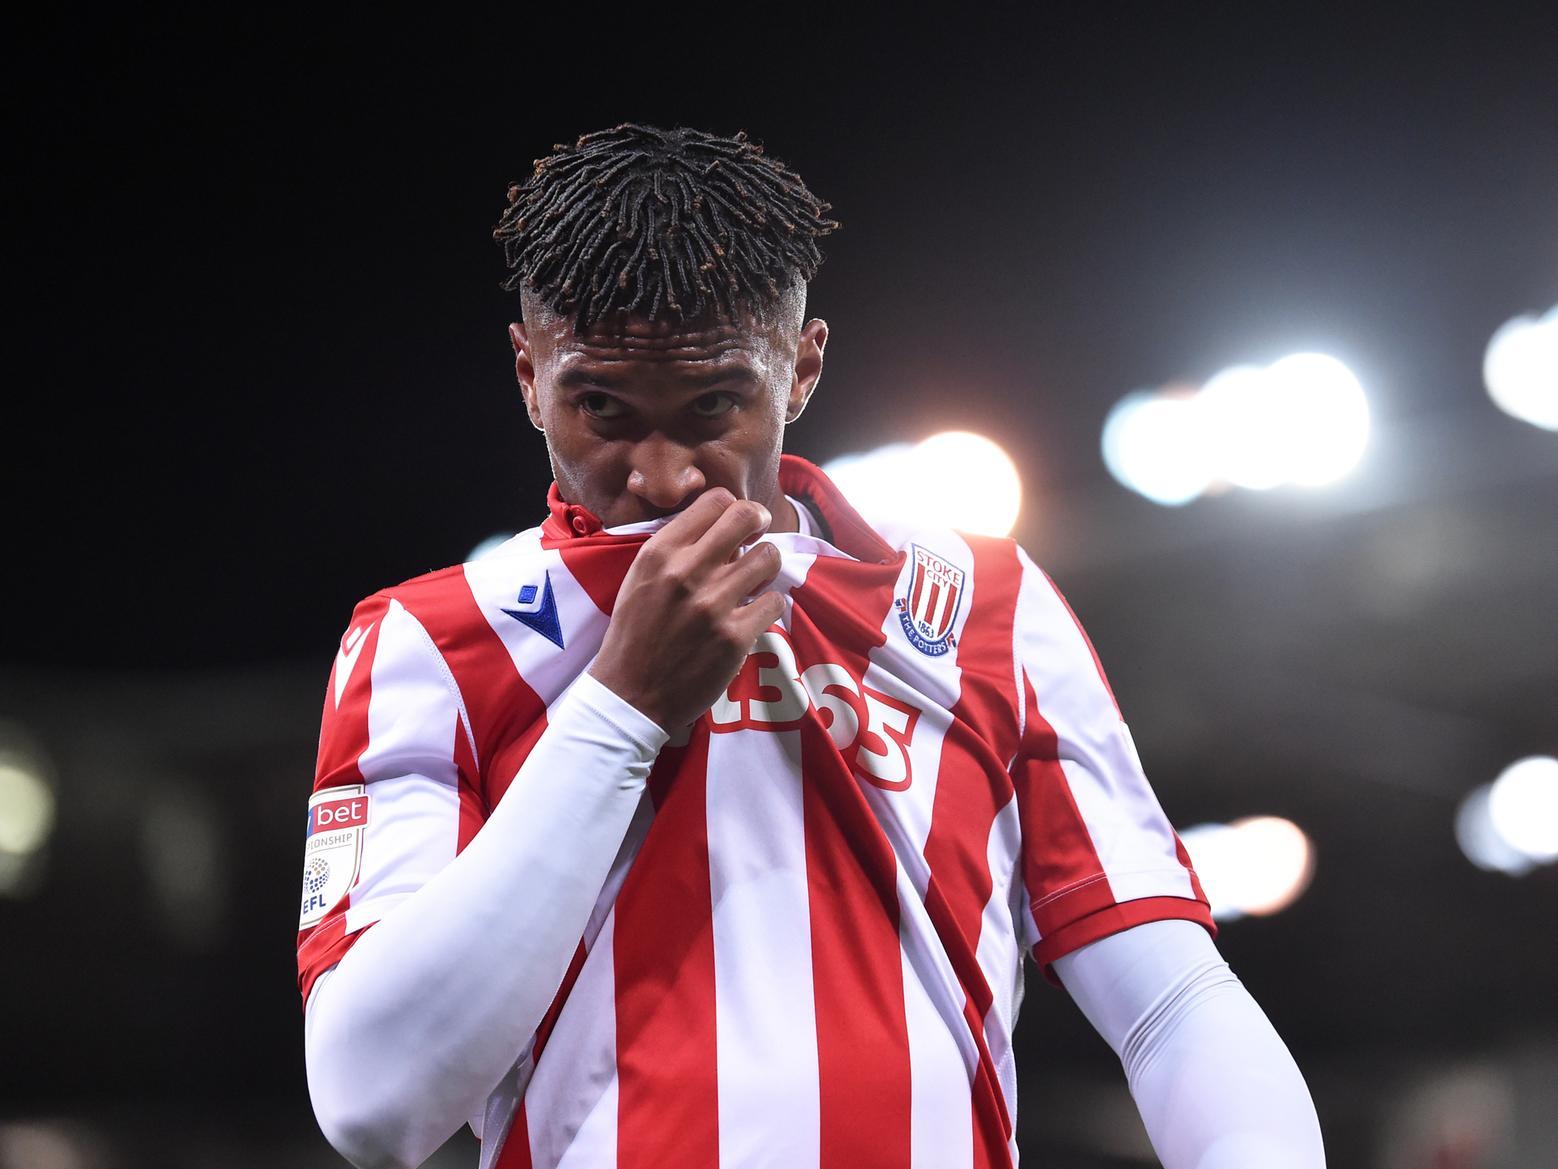 Crystal Palace, Bournemouth and Wolves are the latest sides to be linked with Stoke City forward Tyrese Campbell, who is likely to leave the club this month ahead of his contract expiring next summer. (talkSPORT)